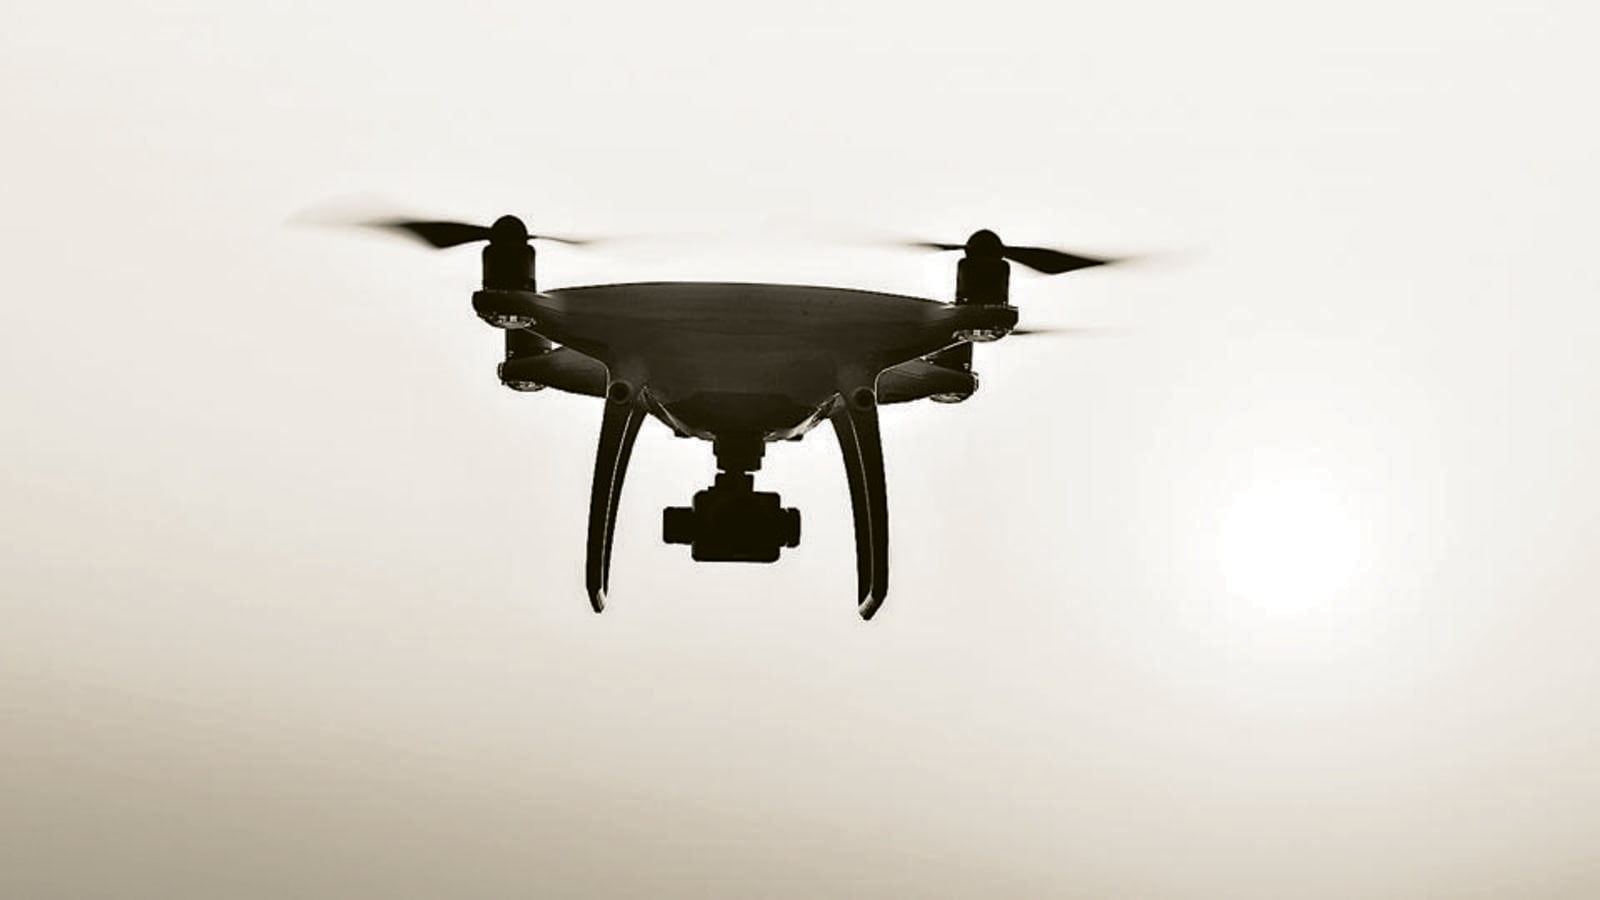 The killer drones are here. Get ready - Times